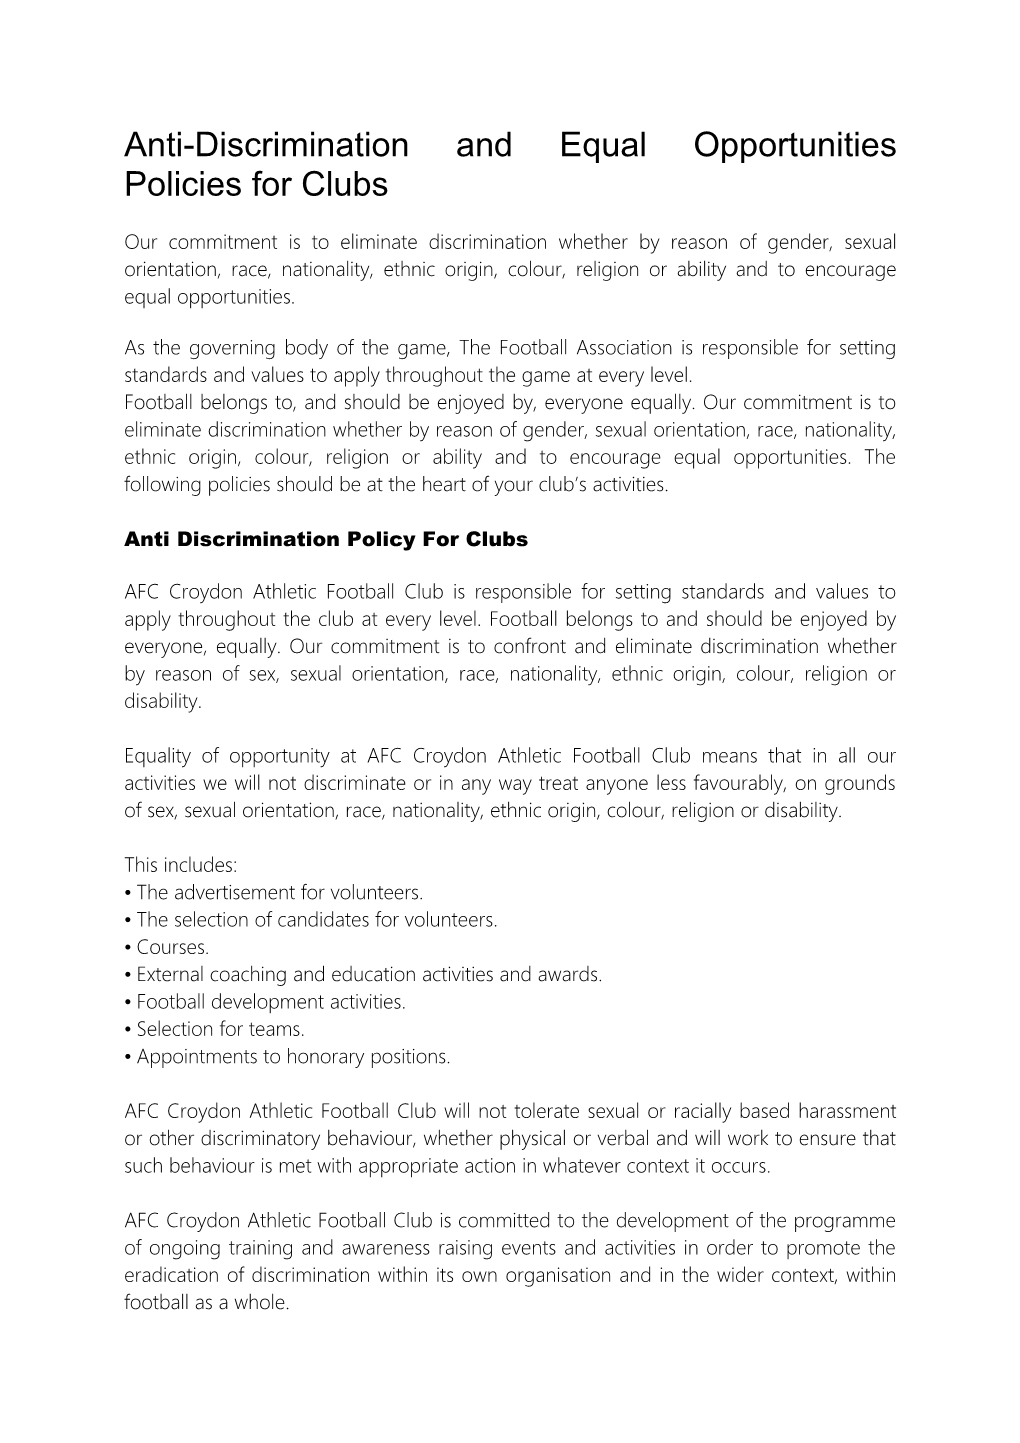 Anti- Discrimination and Equal Opportunities Policies for Clubs